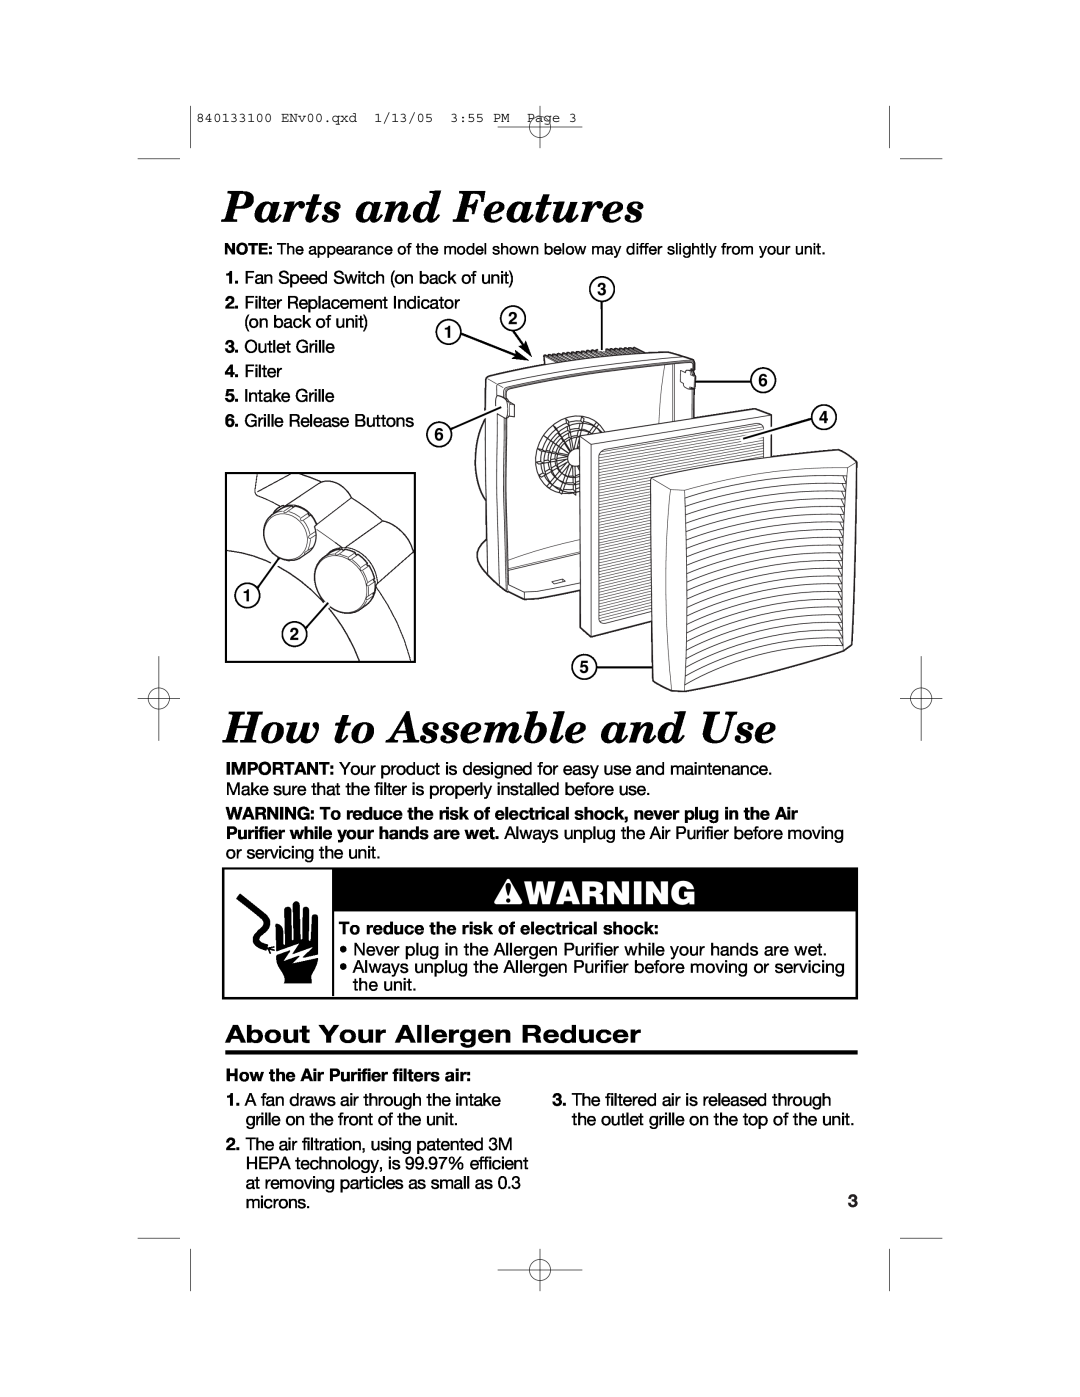 Hamilton Beach HEPA manual Parts and Features, How to Assemble and Use, wWARNING, About Your Allergen Reducer 